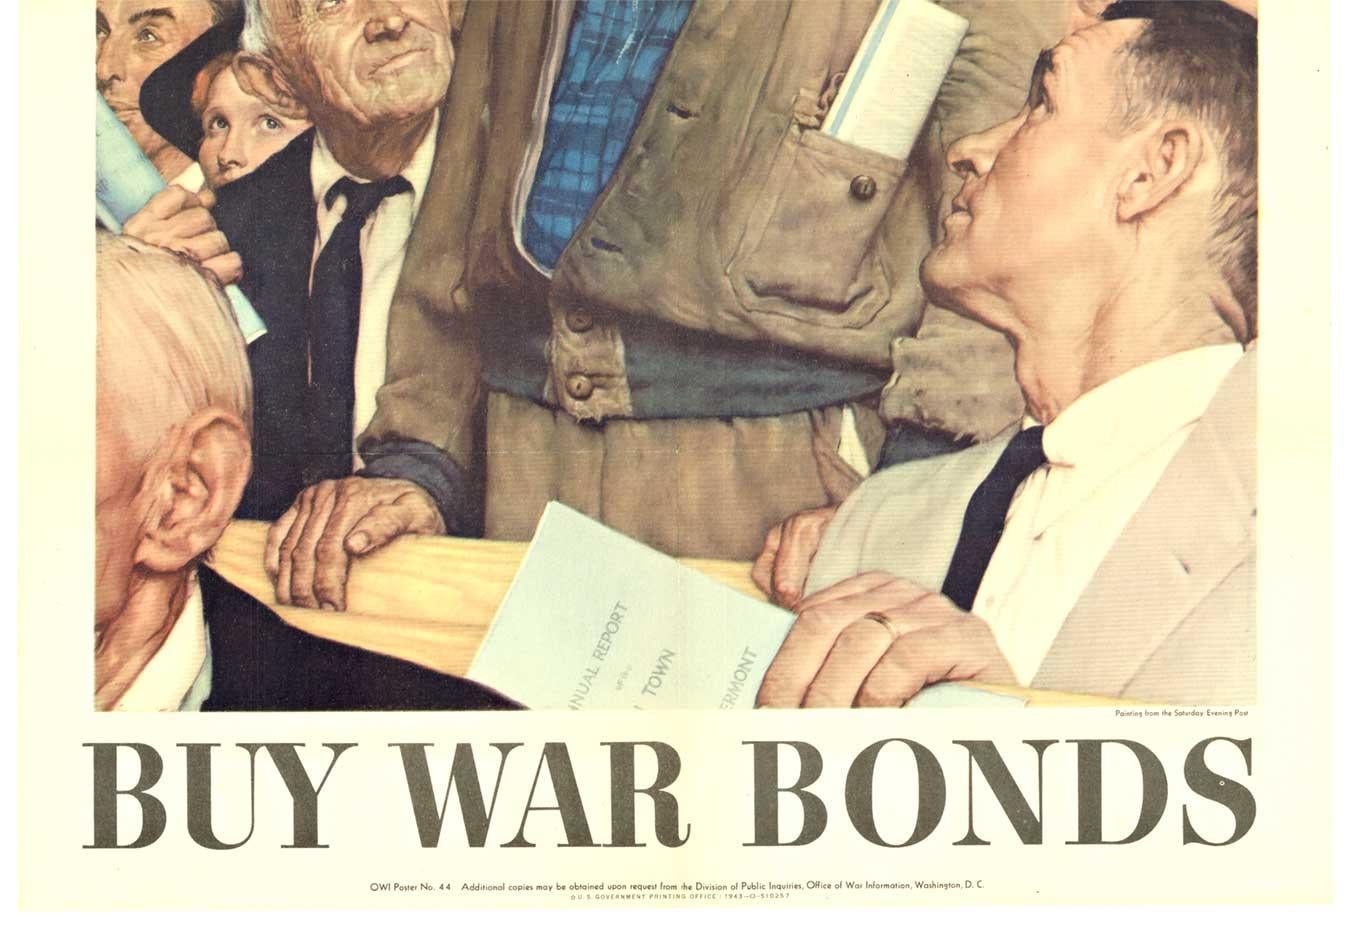 Original Save Freedom of Speech  Buy War Bonds vintage poster - American Realist Print by Norman Rockwell